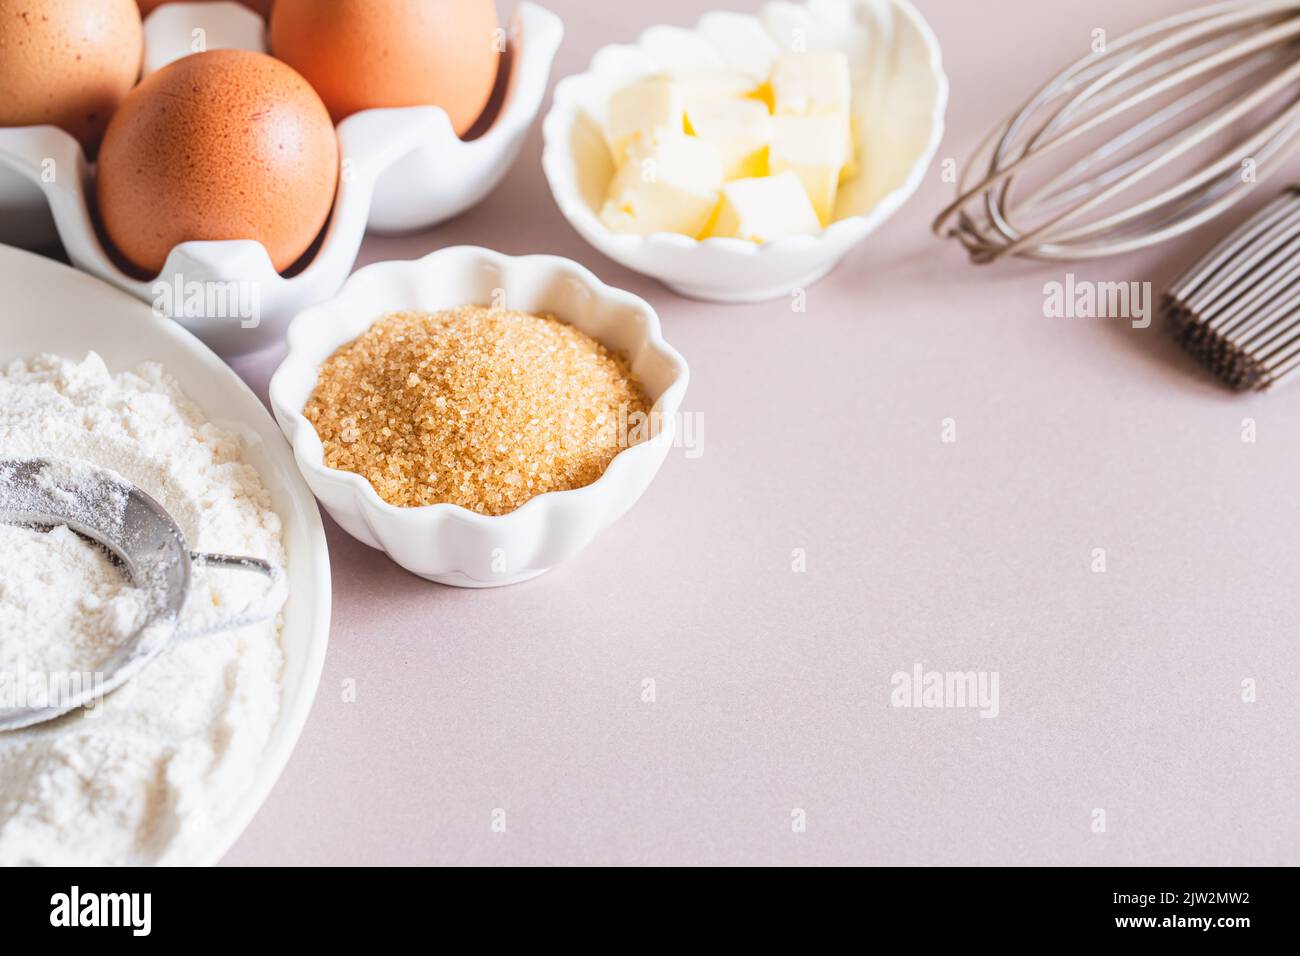 https://c8.alamy.com/comp/2JW2MW2/baking-or-cooking-background-frame-ingredients-kitchen-items-for-baking-cakes-kitchen-utensils-flour-eggs-brown-sugar-butter-text-space-top-v-2JW2MW2.jpg